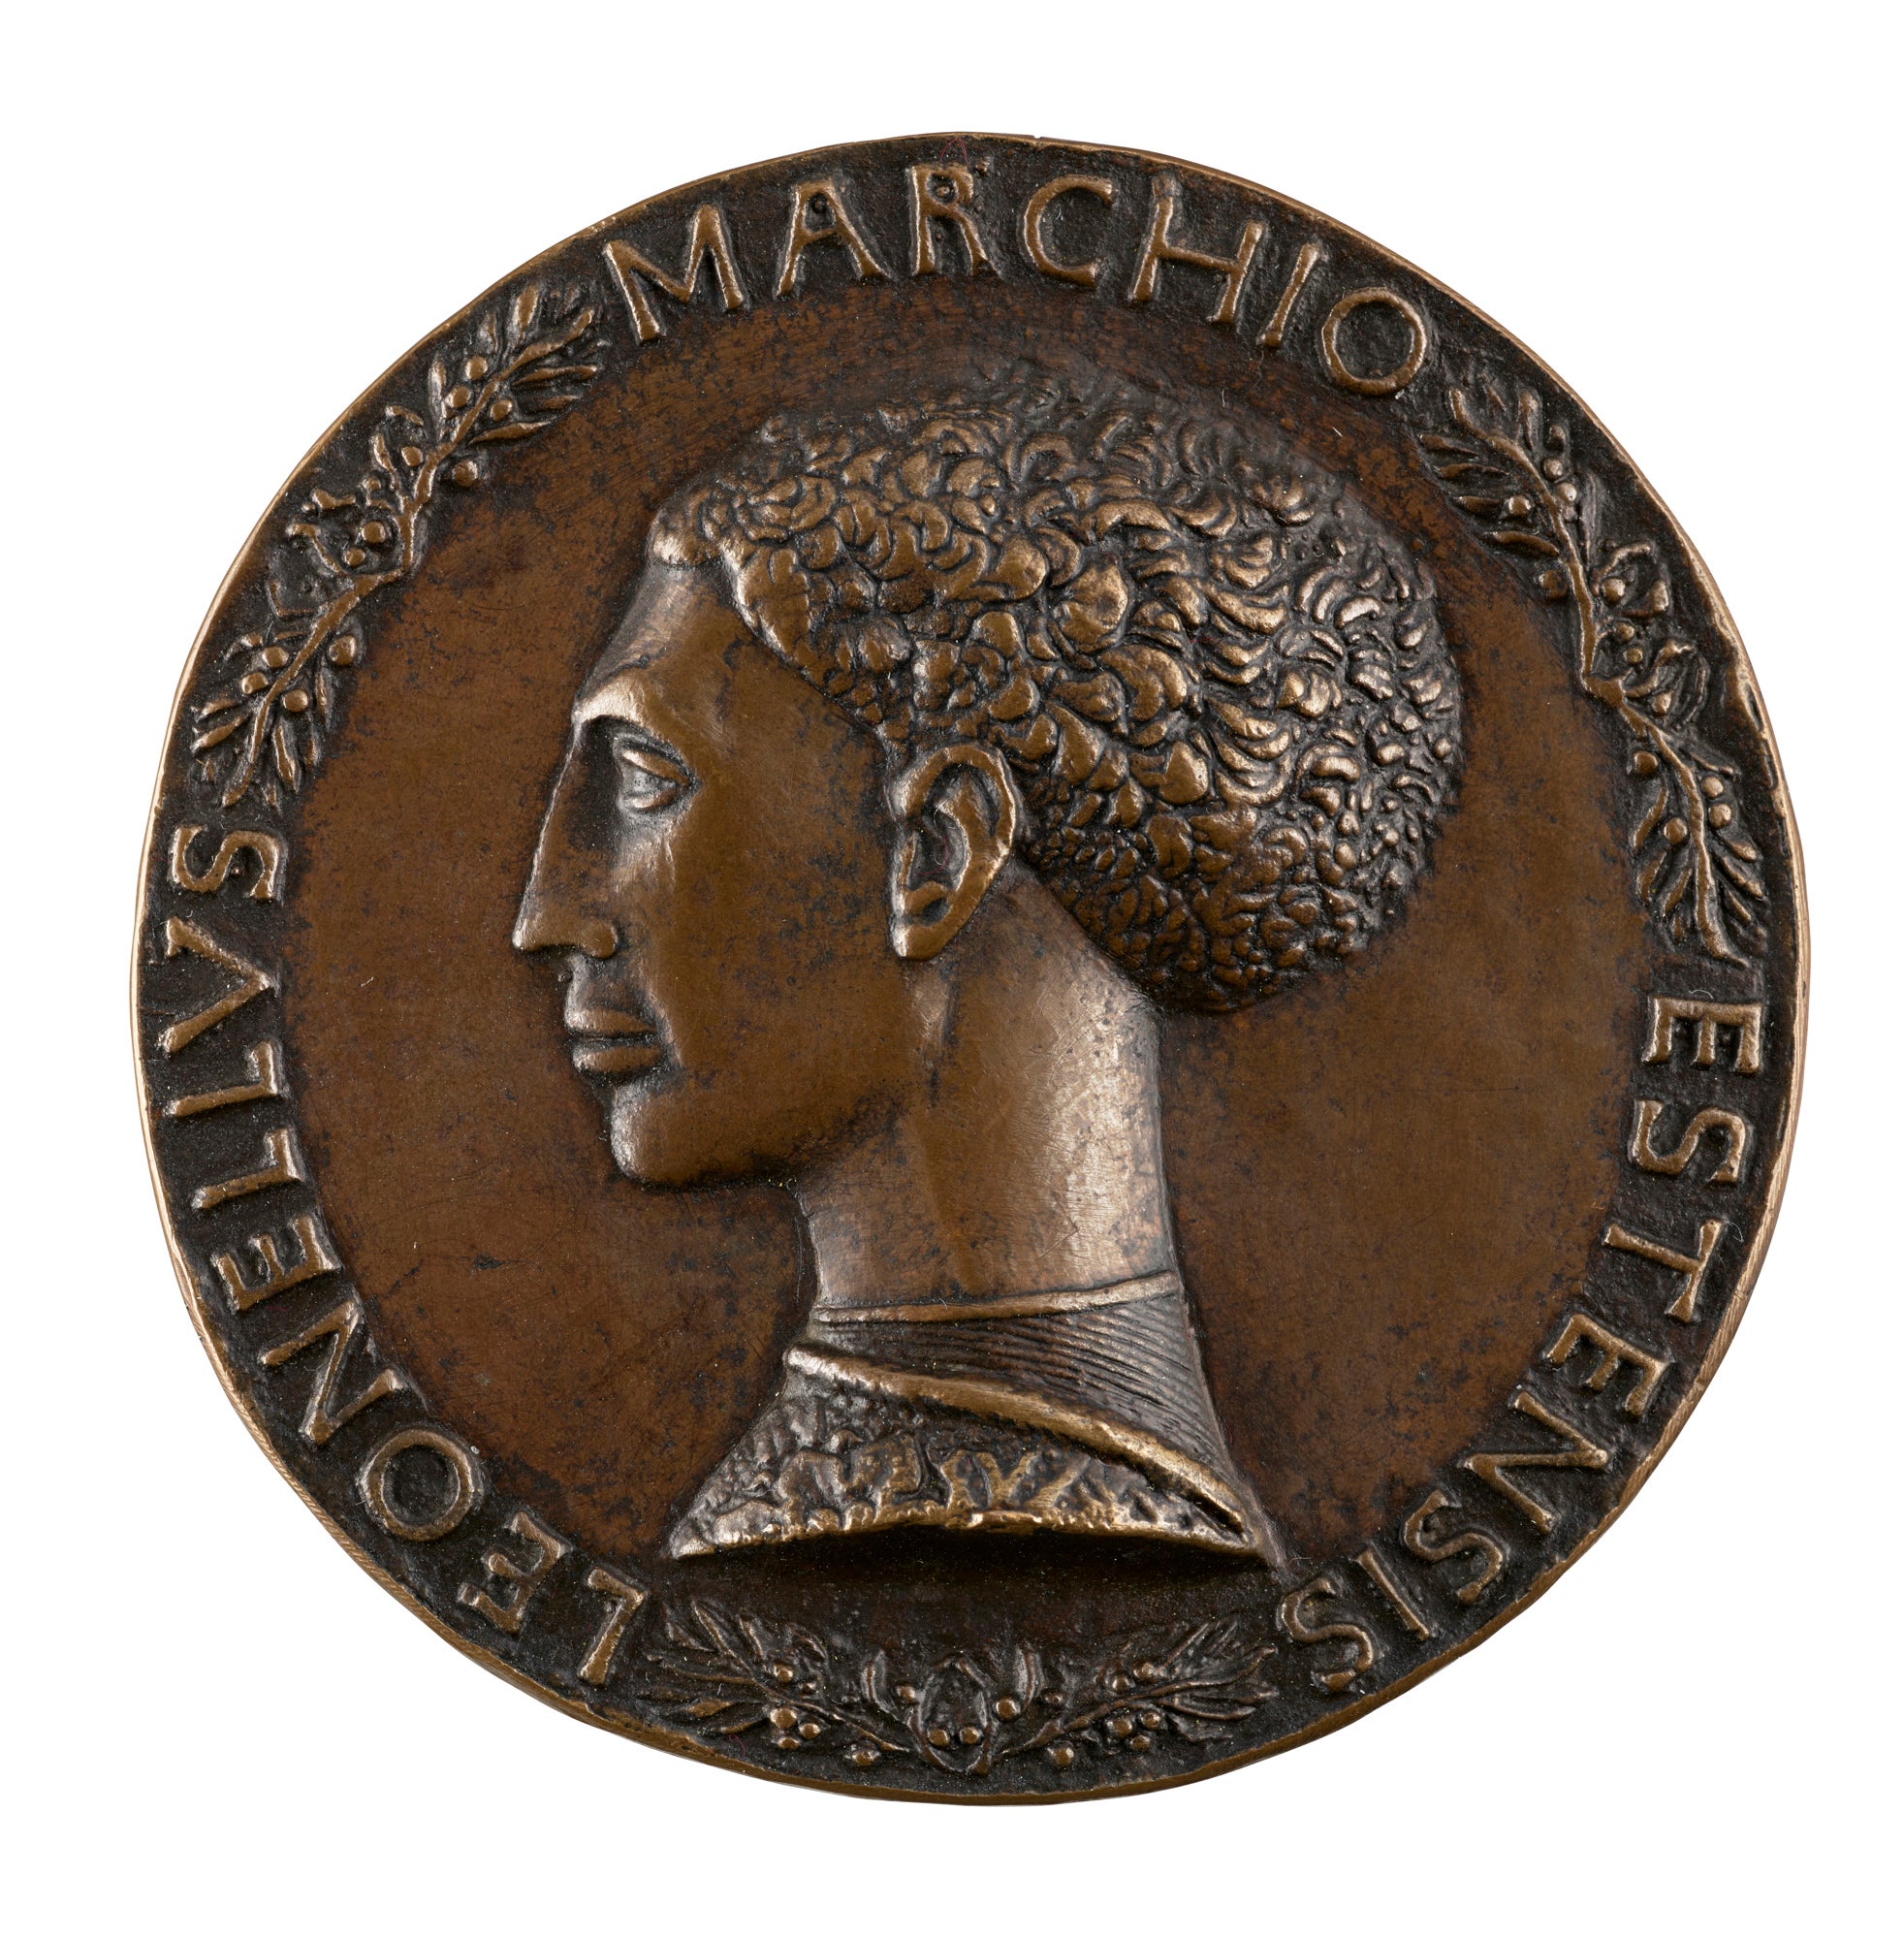 circular bronze medal with relief of woman in profile